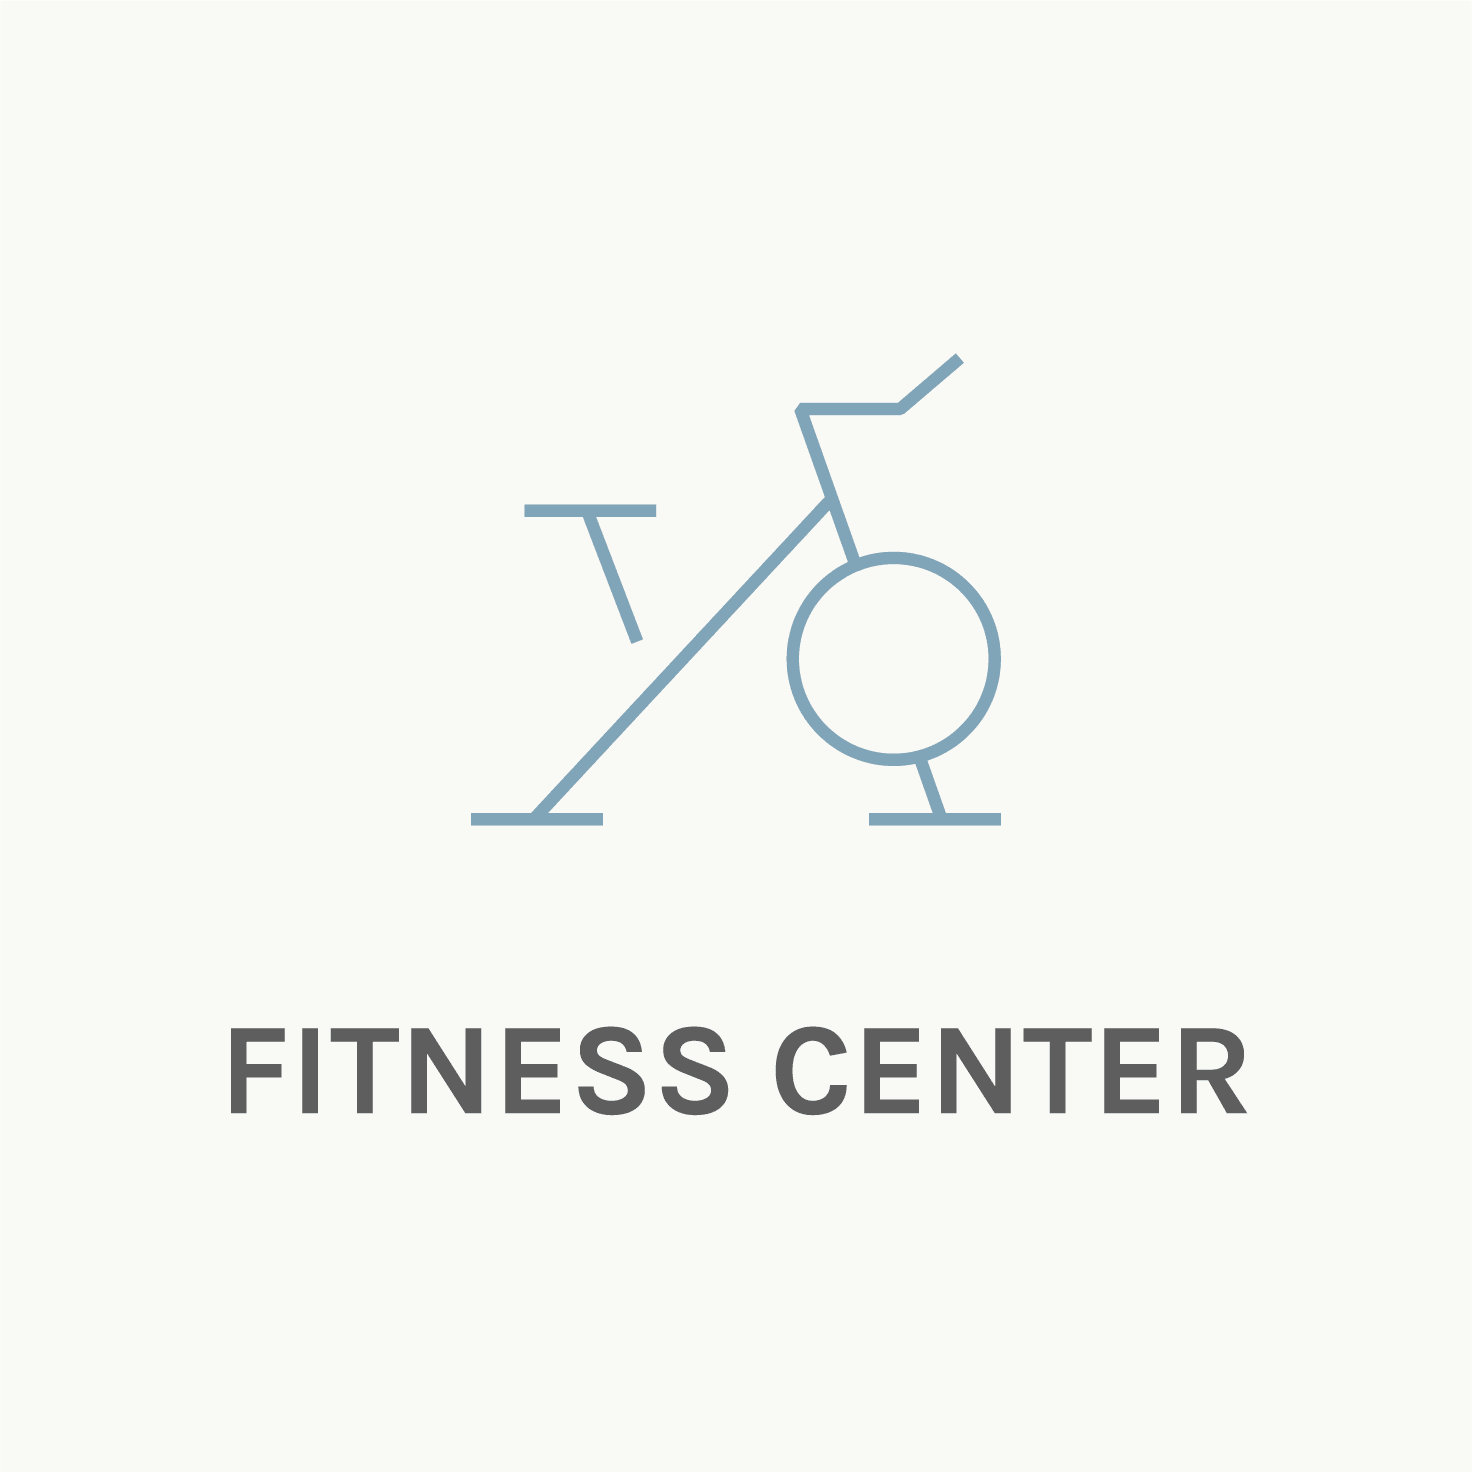 24 Hour Fitness Center For Active Lifestyles